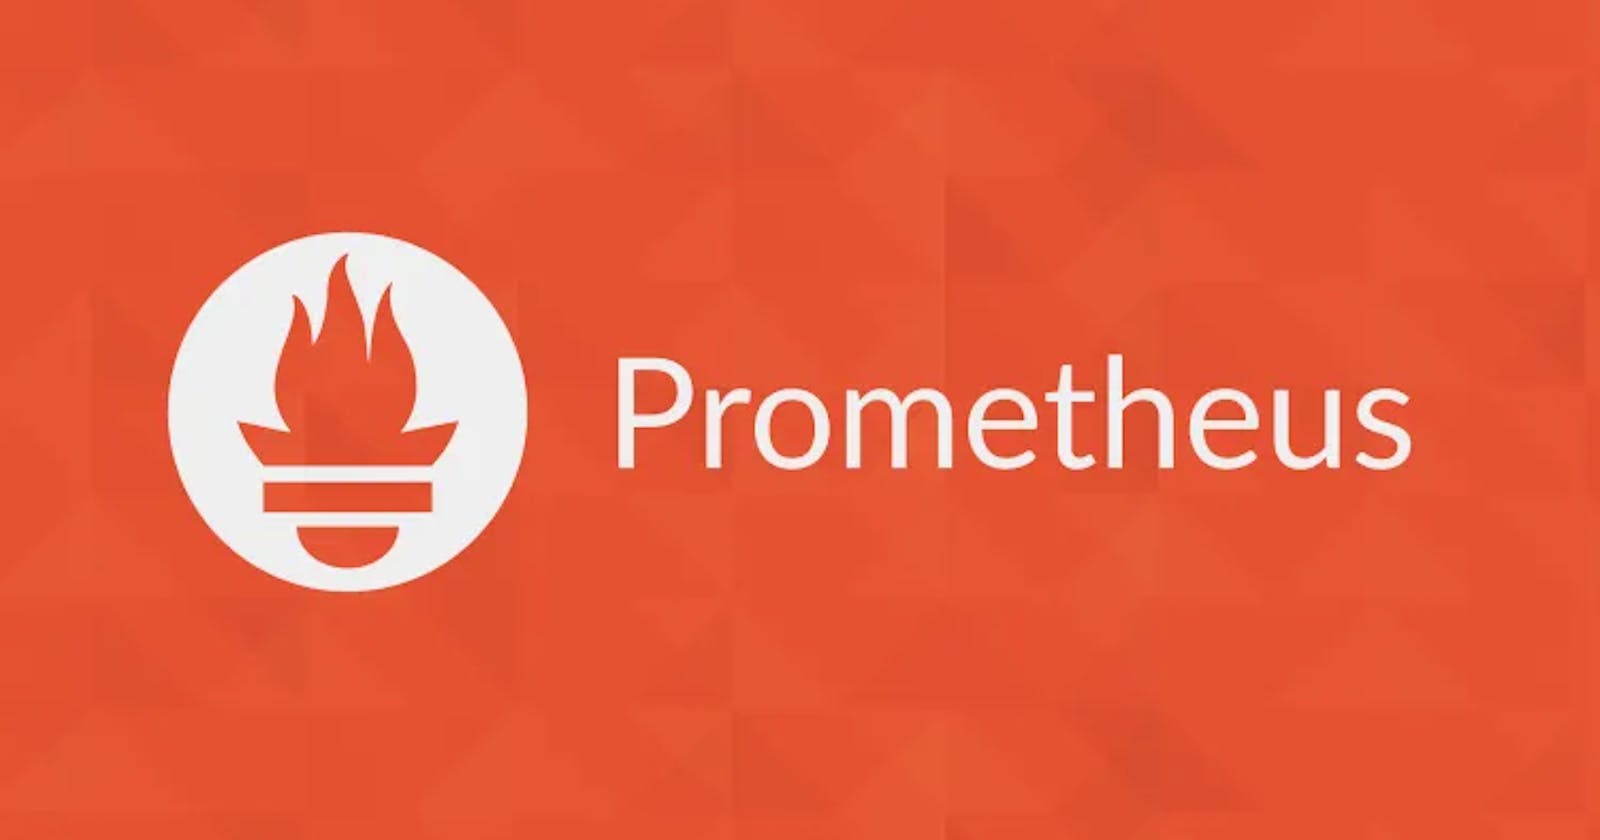 How to use Prometheus for web application monitoring